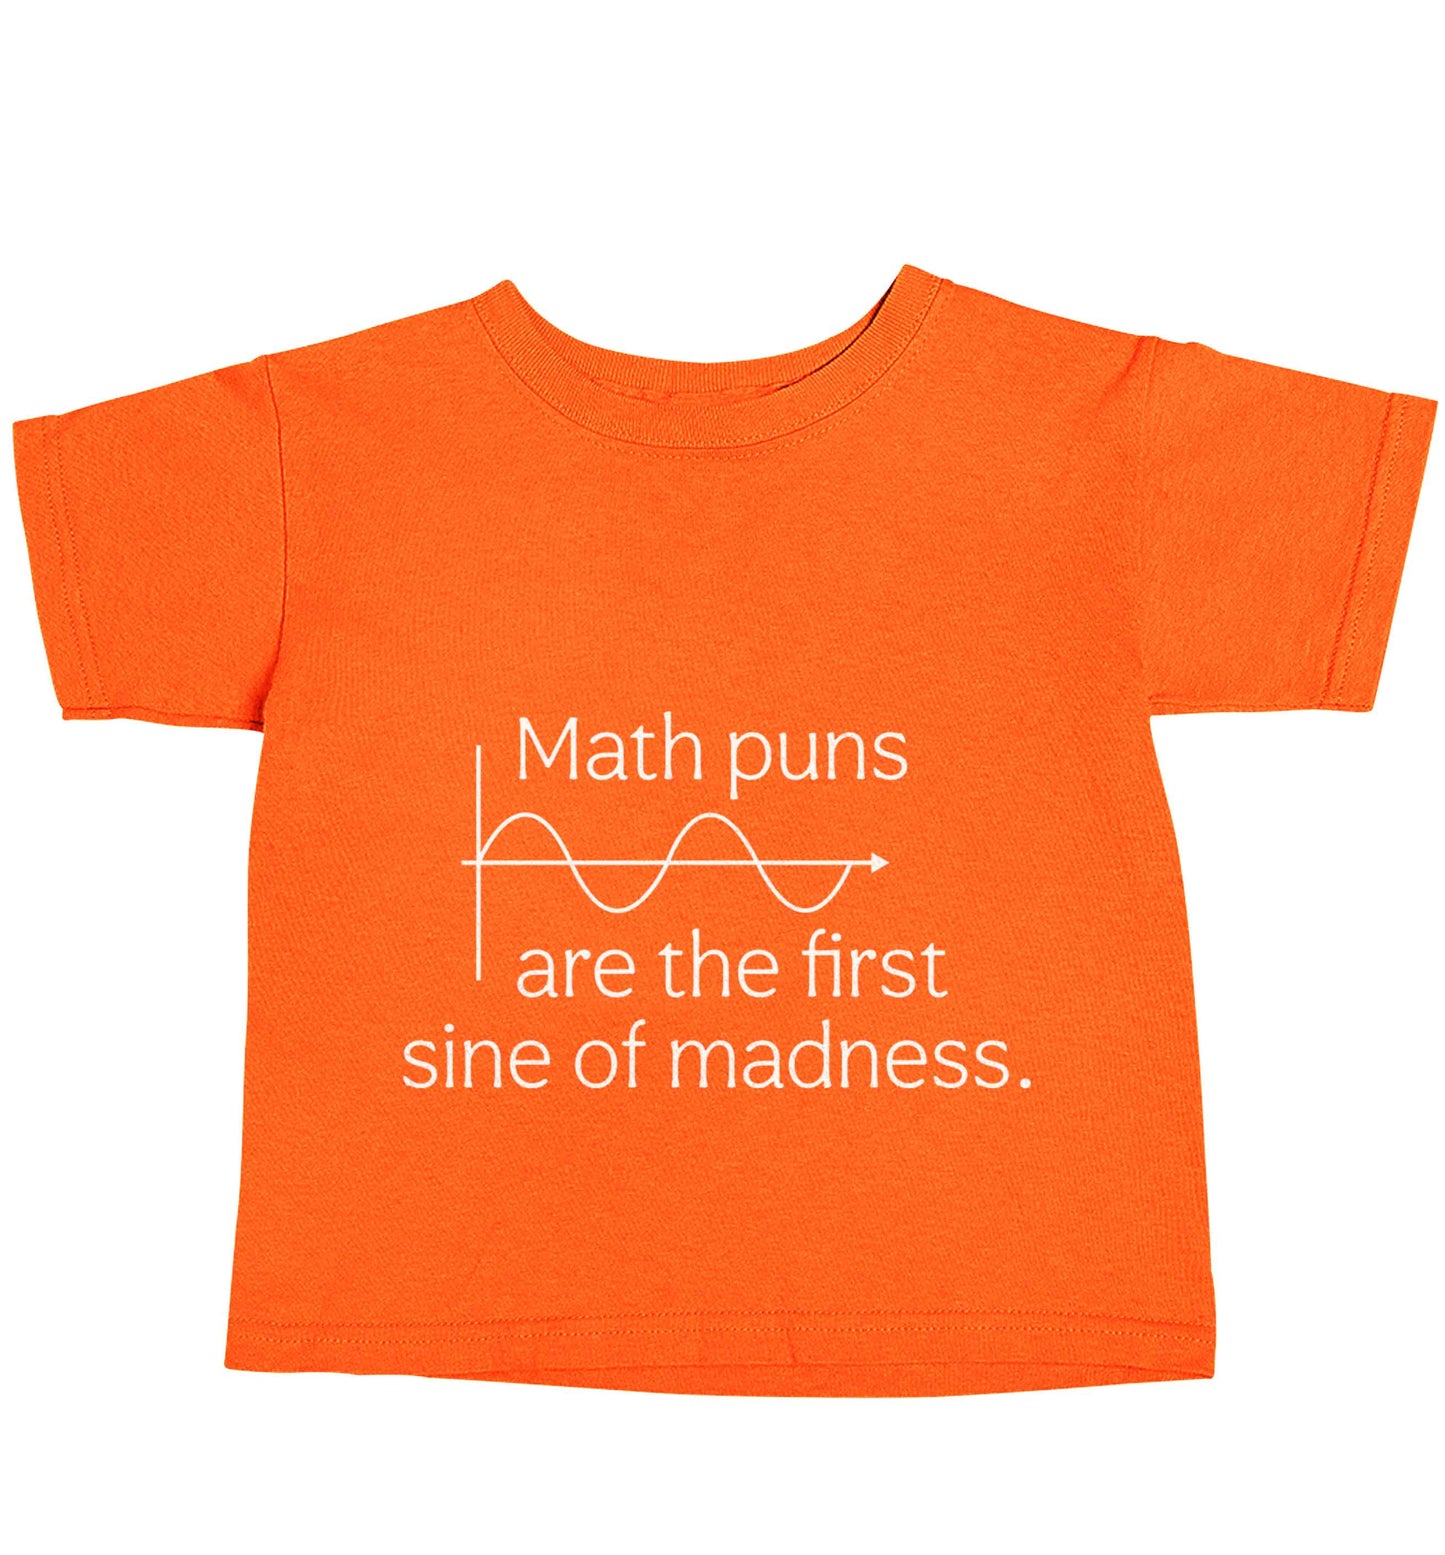 Math puns are the first sine of madness orange baby toddler Tshirt 2 Years